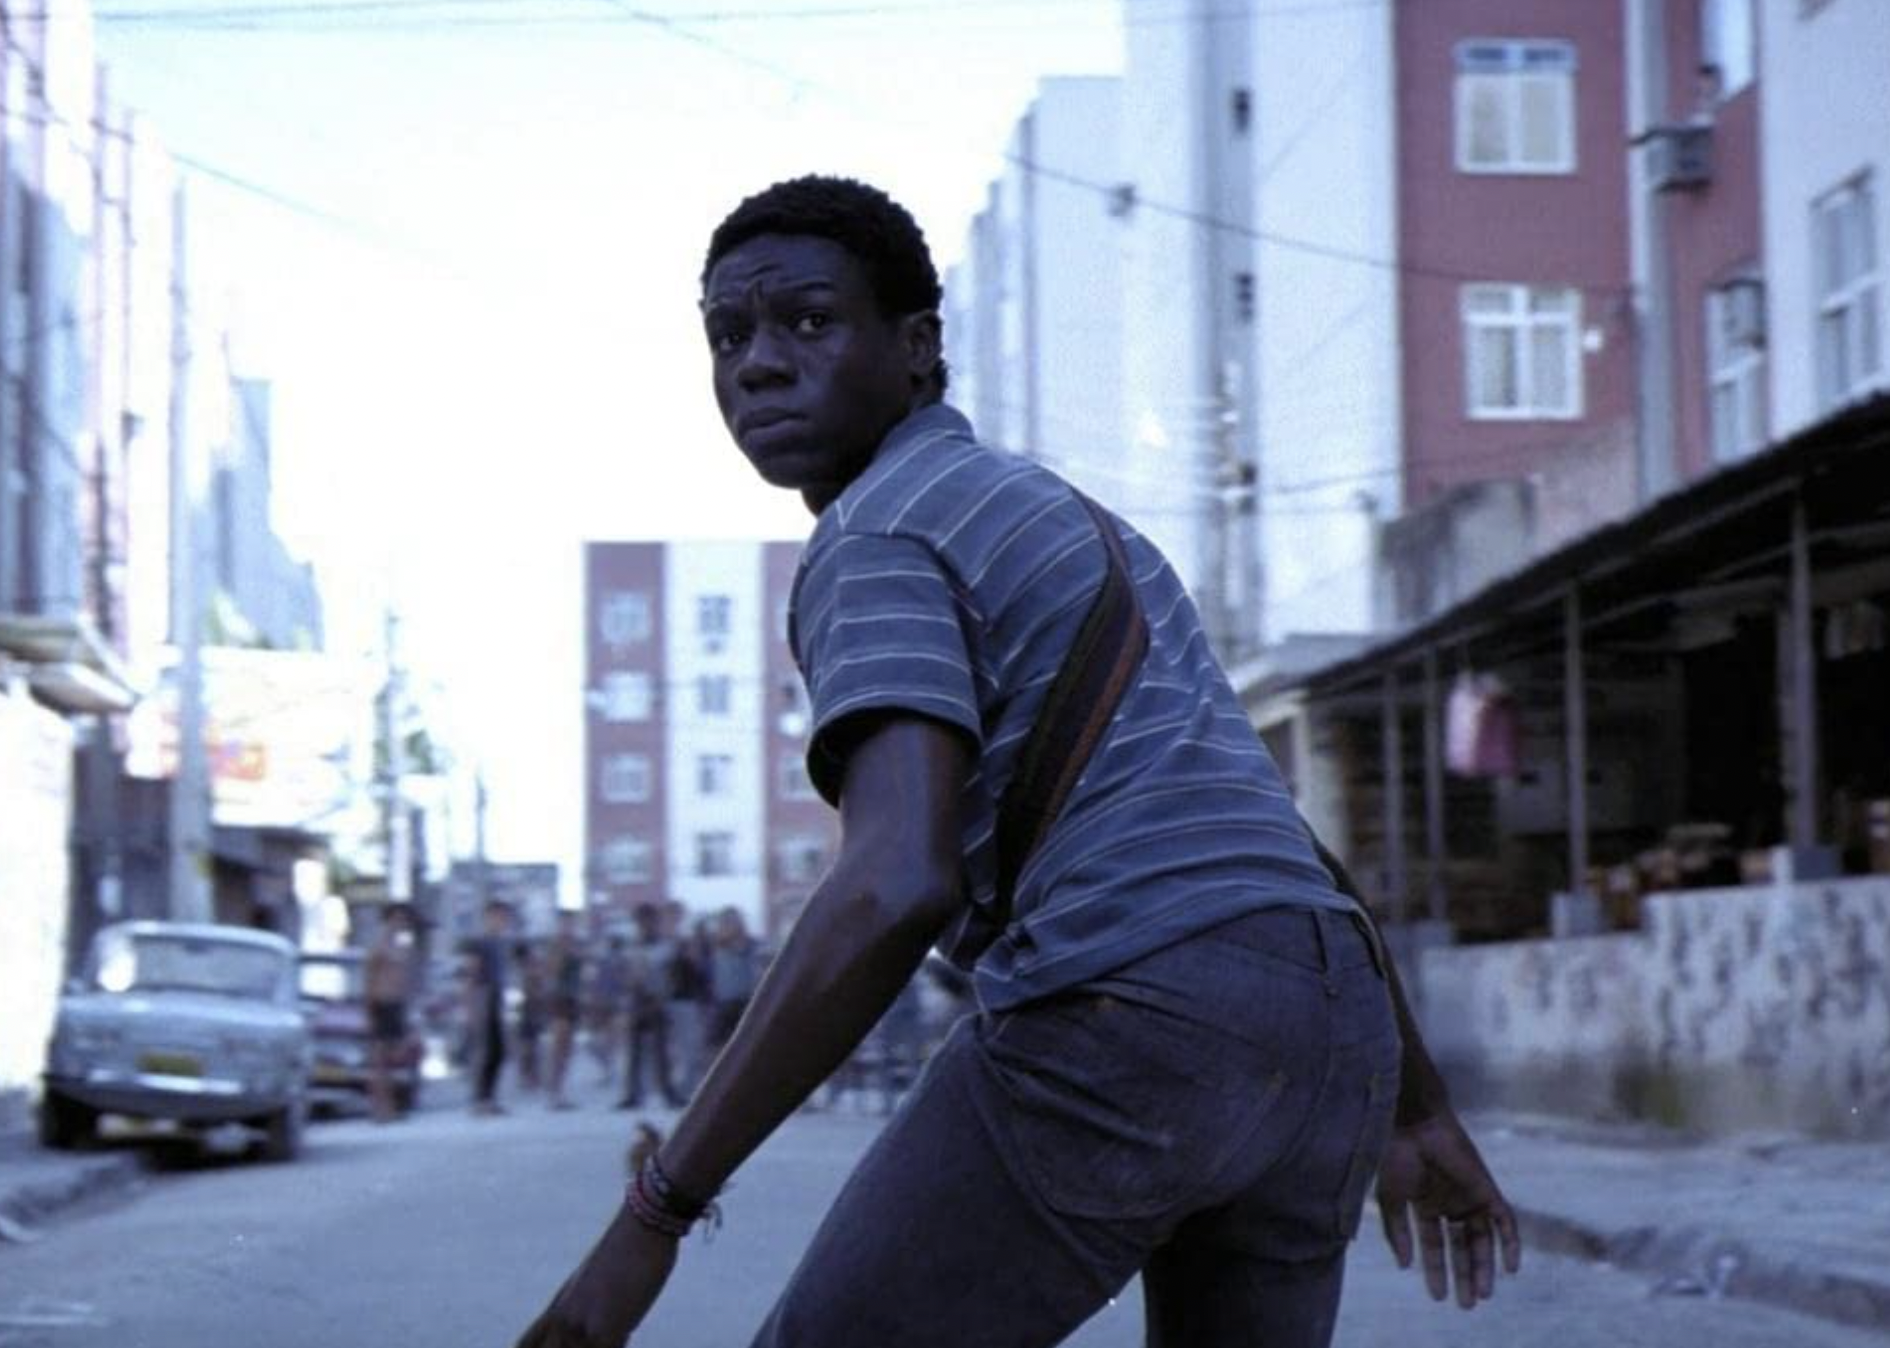 Alexandre Rodrigues in "City of God".